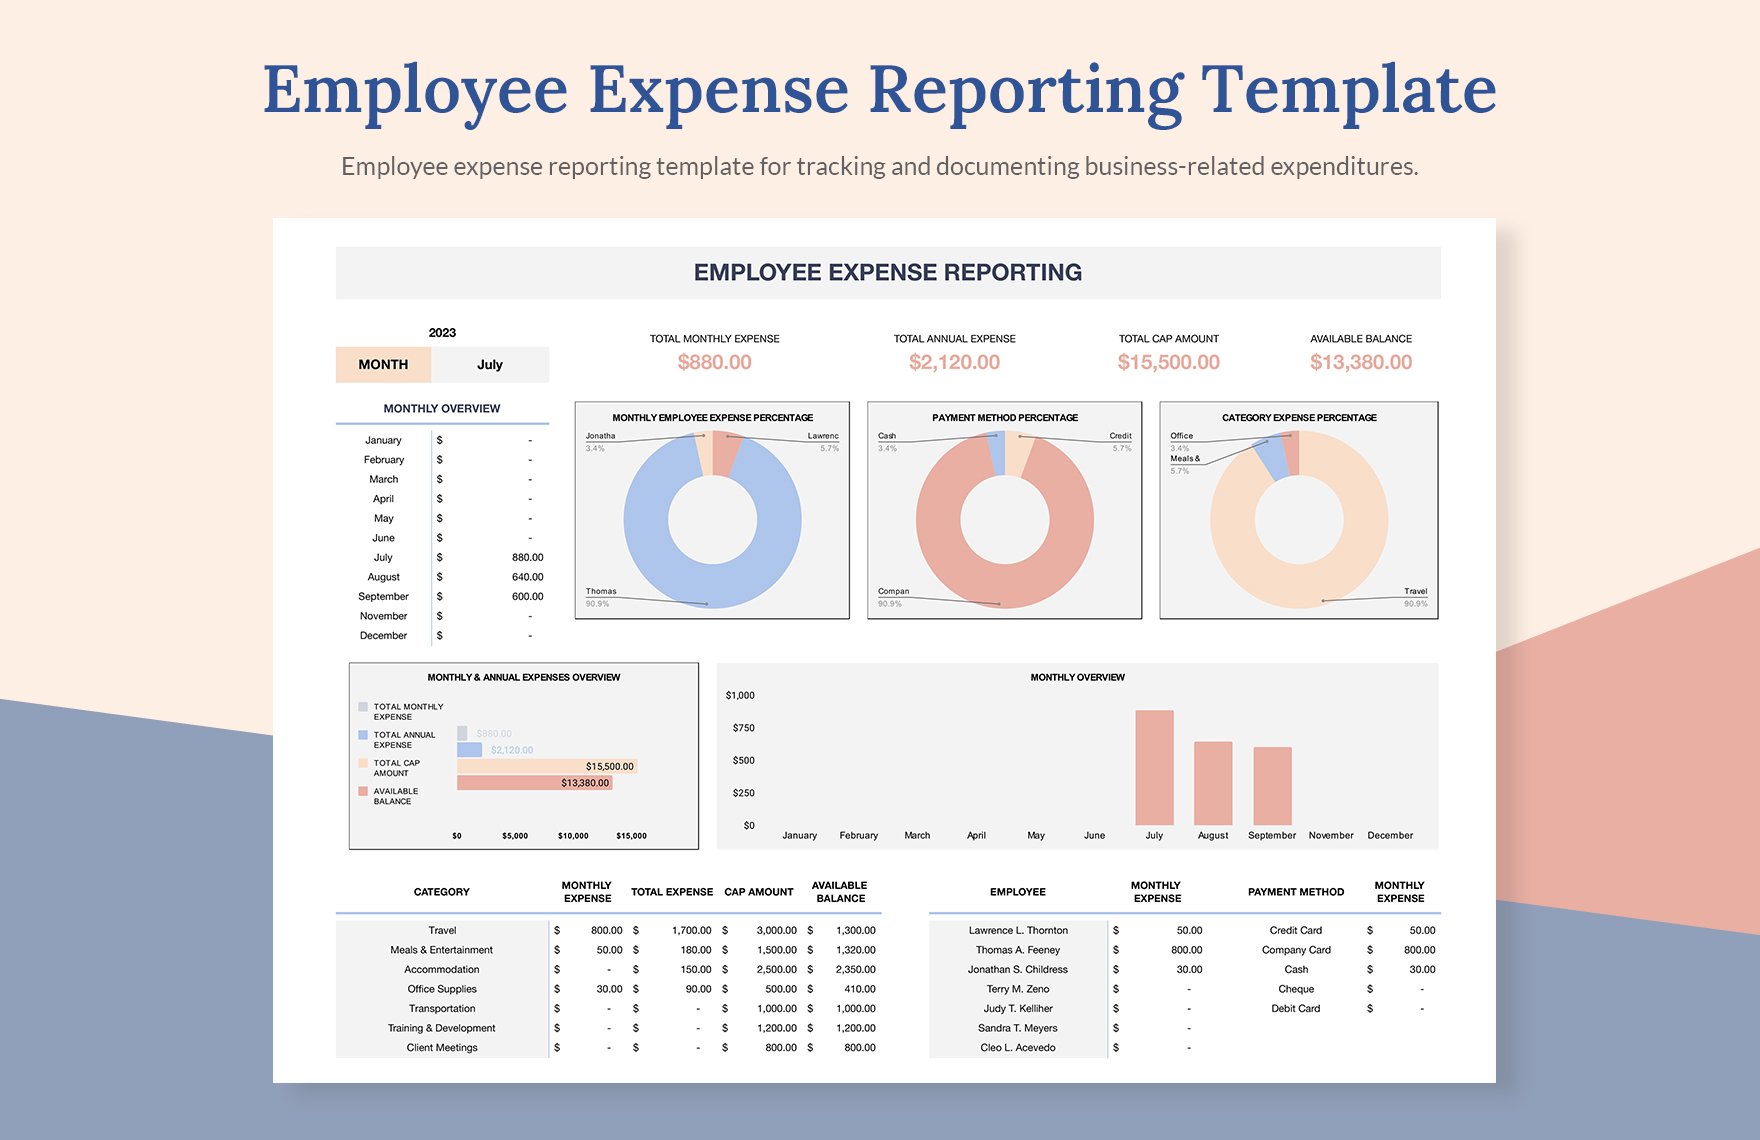 Employee Expense Reporting Template